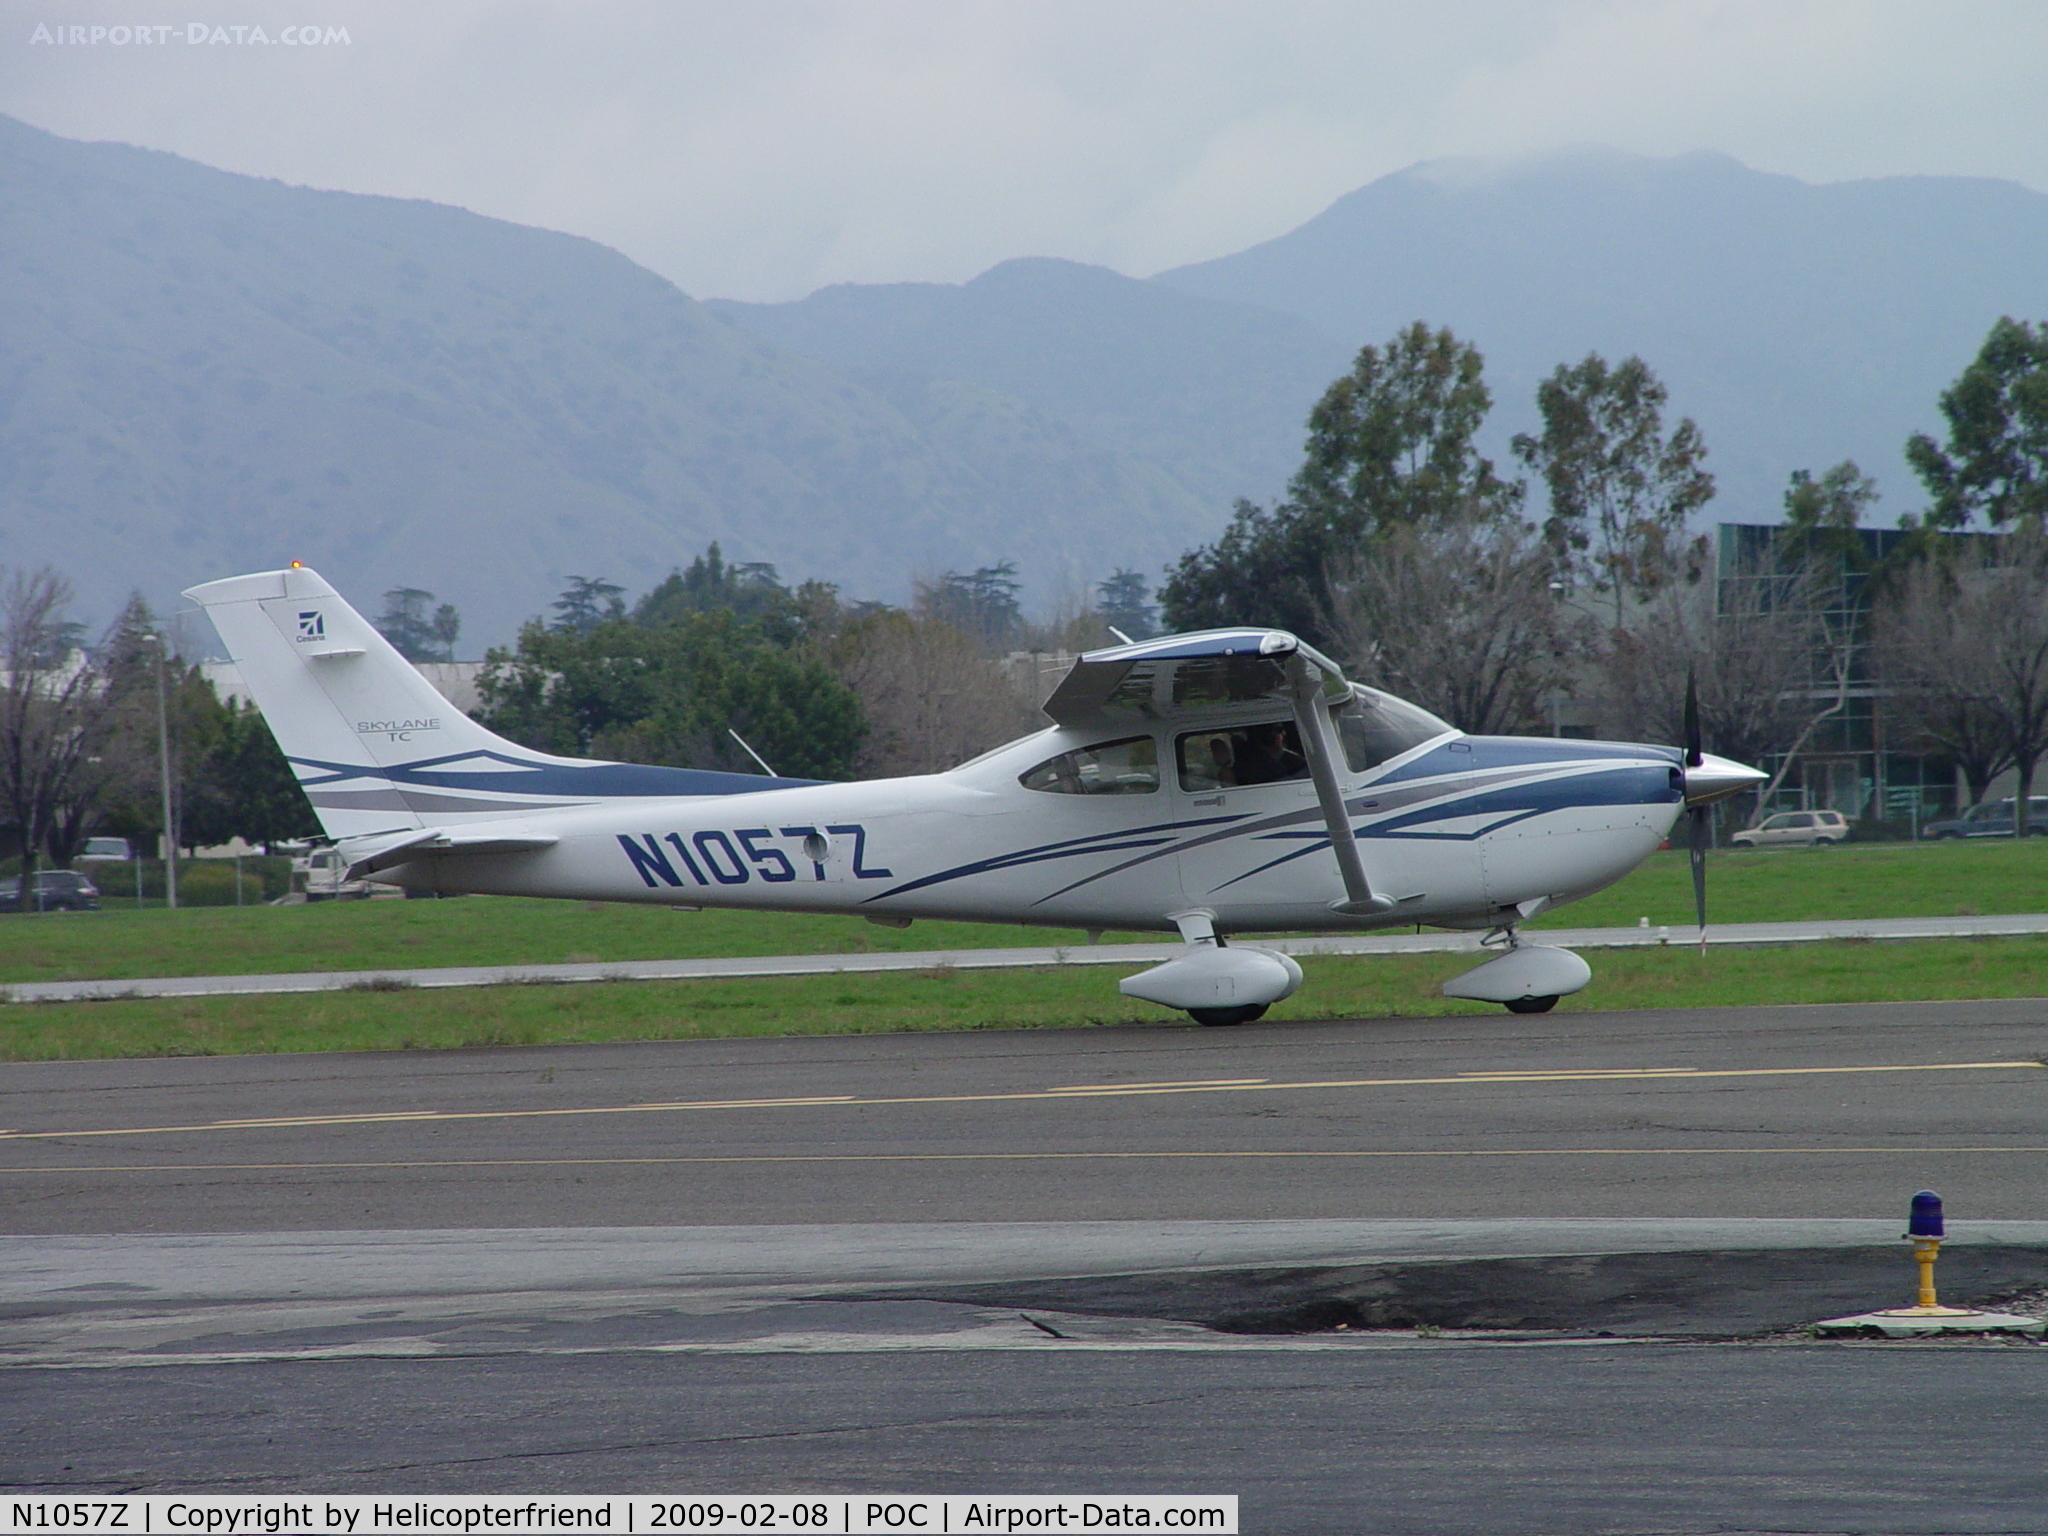 N1057Z, 2007 Cessna T182T Turbo Skylane C/N T18208795, Taxiing to area of 26L for take off, light rain